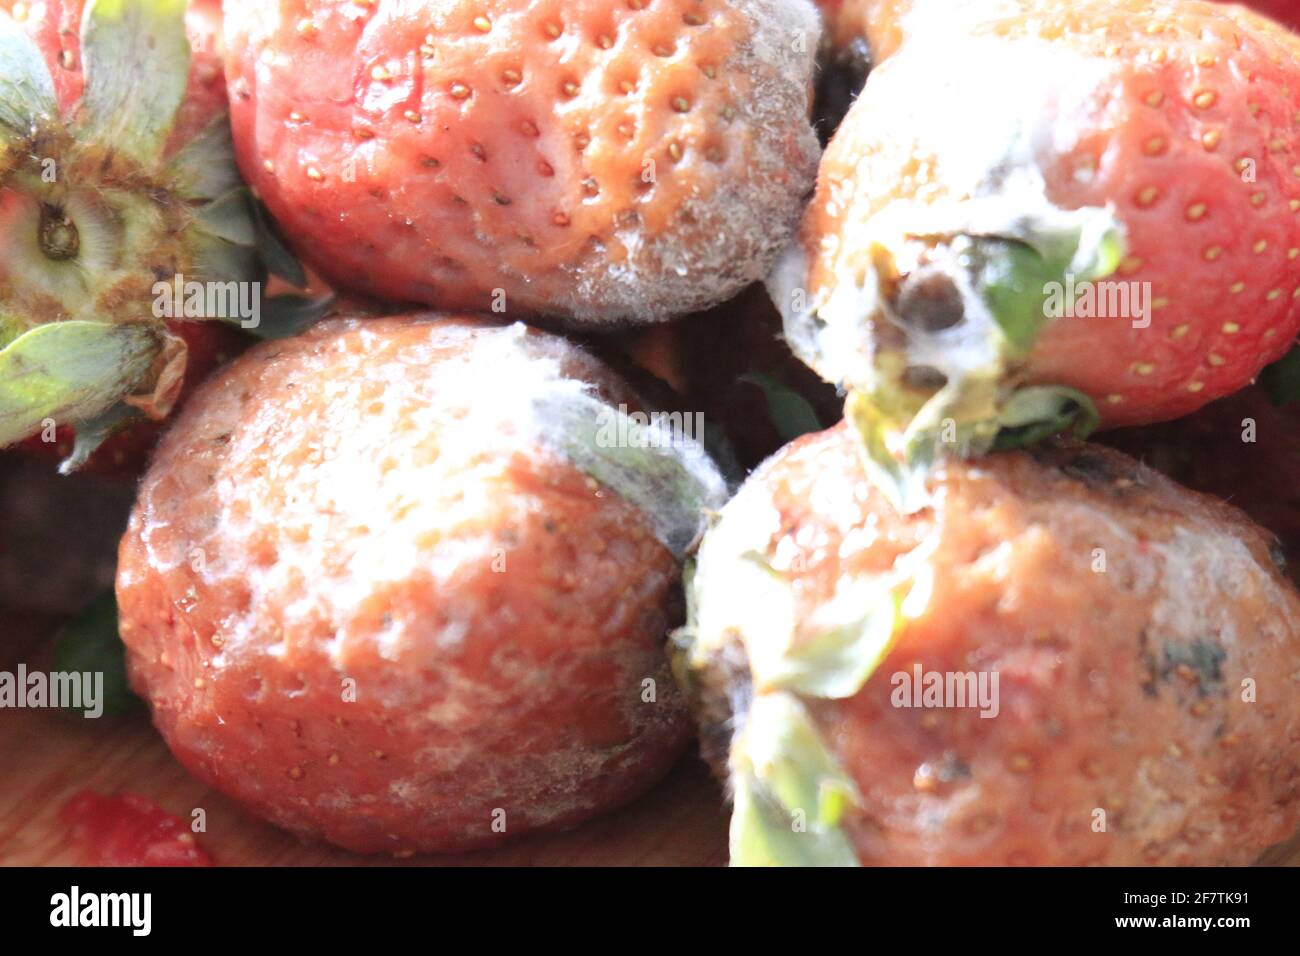 Strawberry with mold stock image. Image of natural, dessert - 216650675